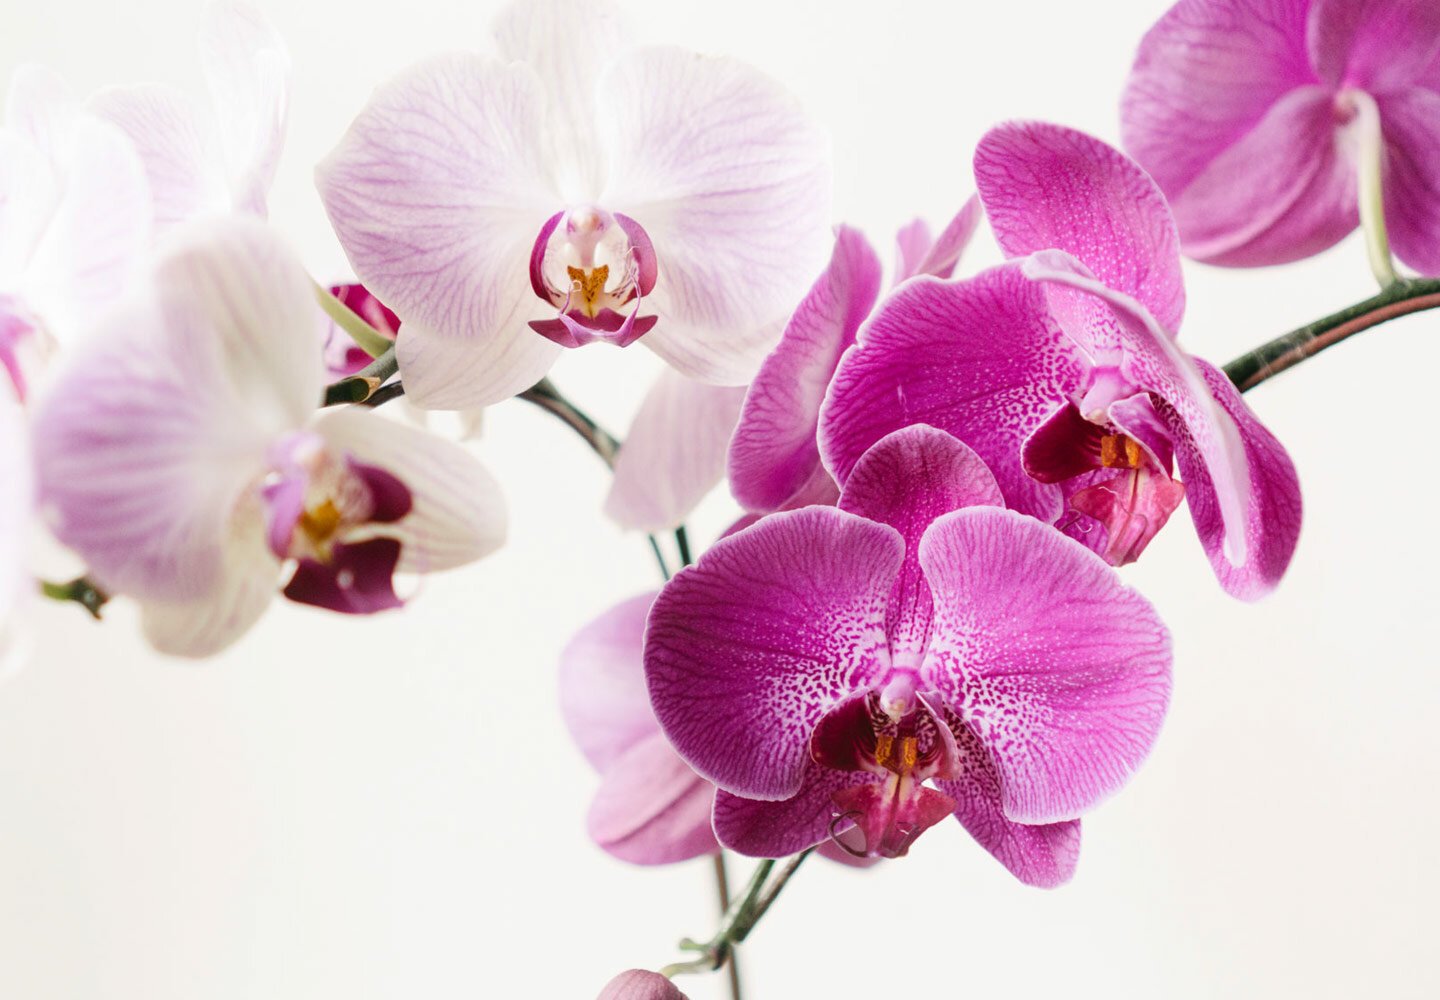 Orchid and its diseases